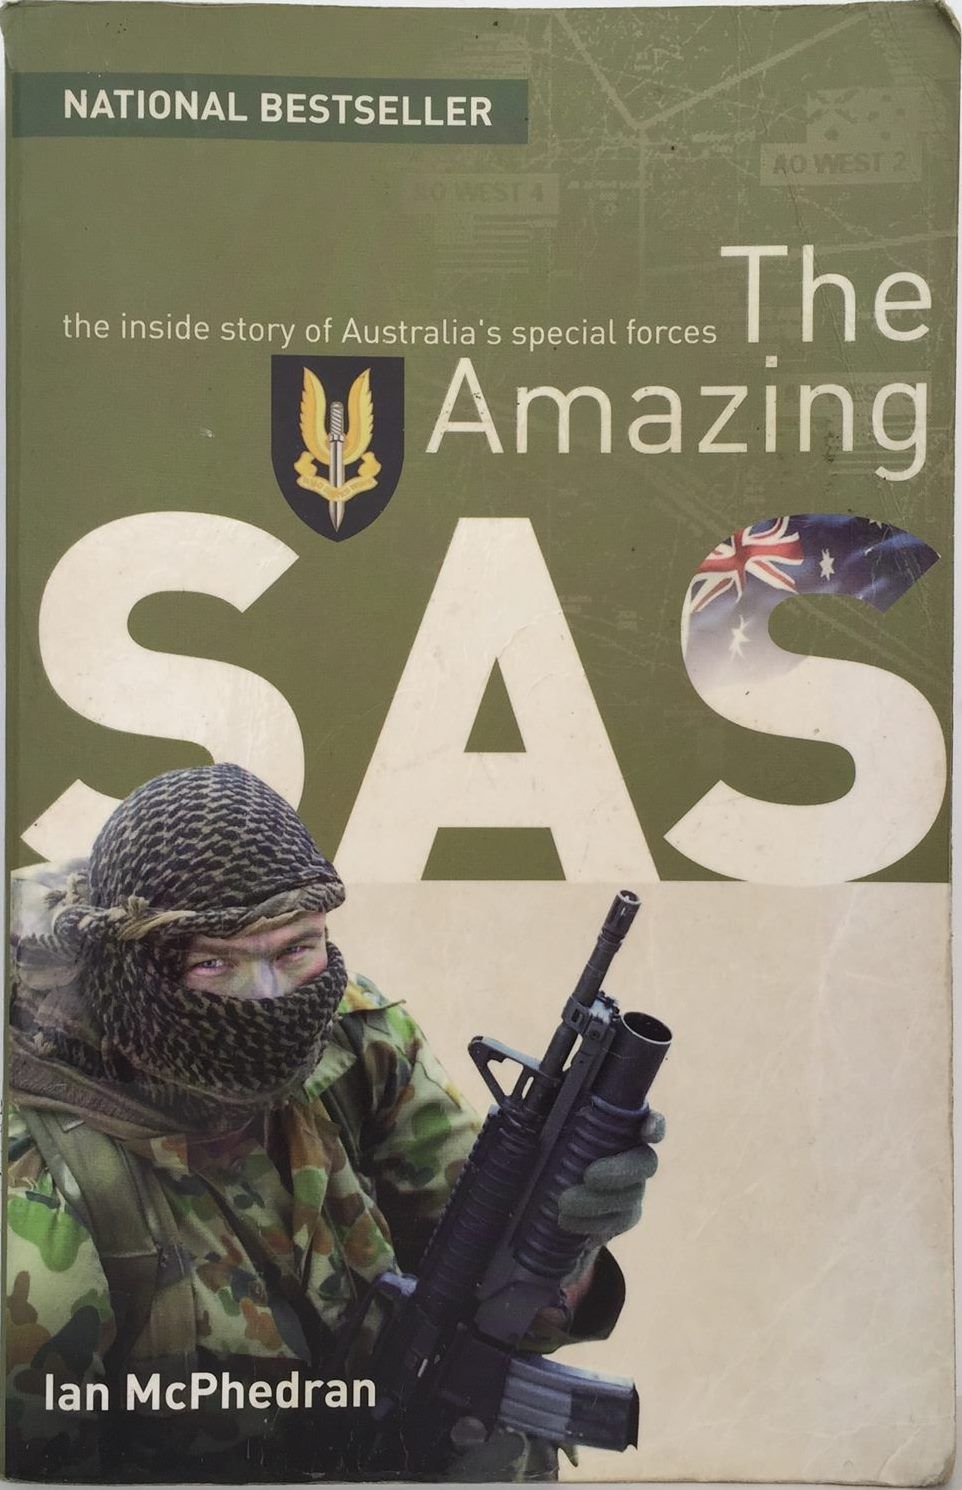 THE AMAZING SAS: The Inside Story Of Australia's Special Forces